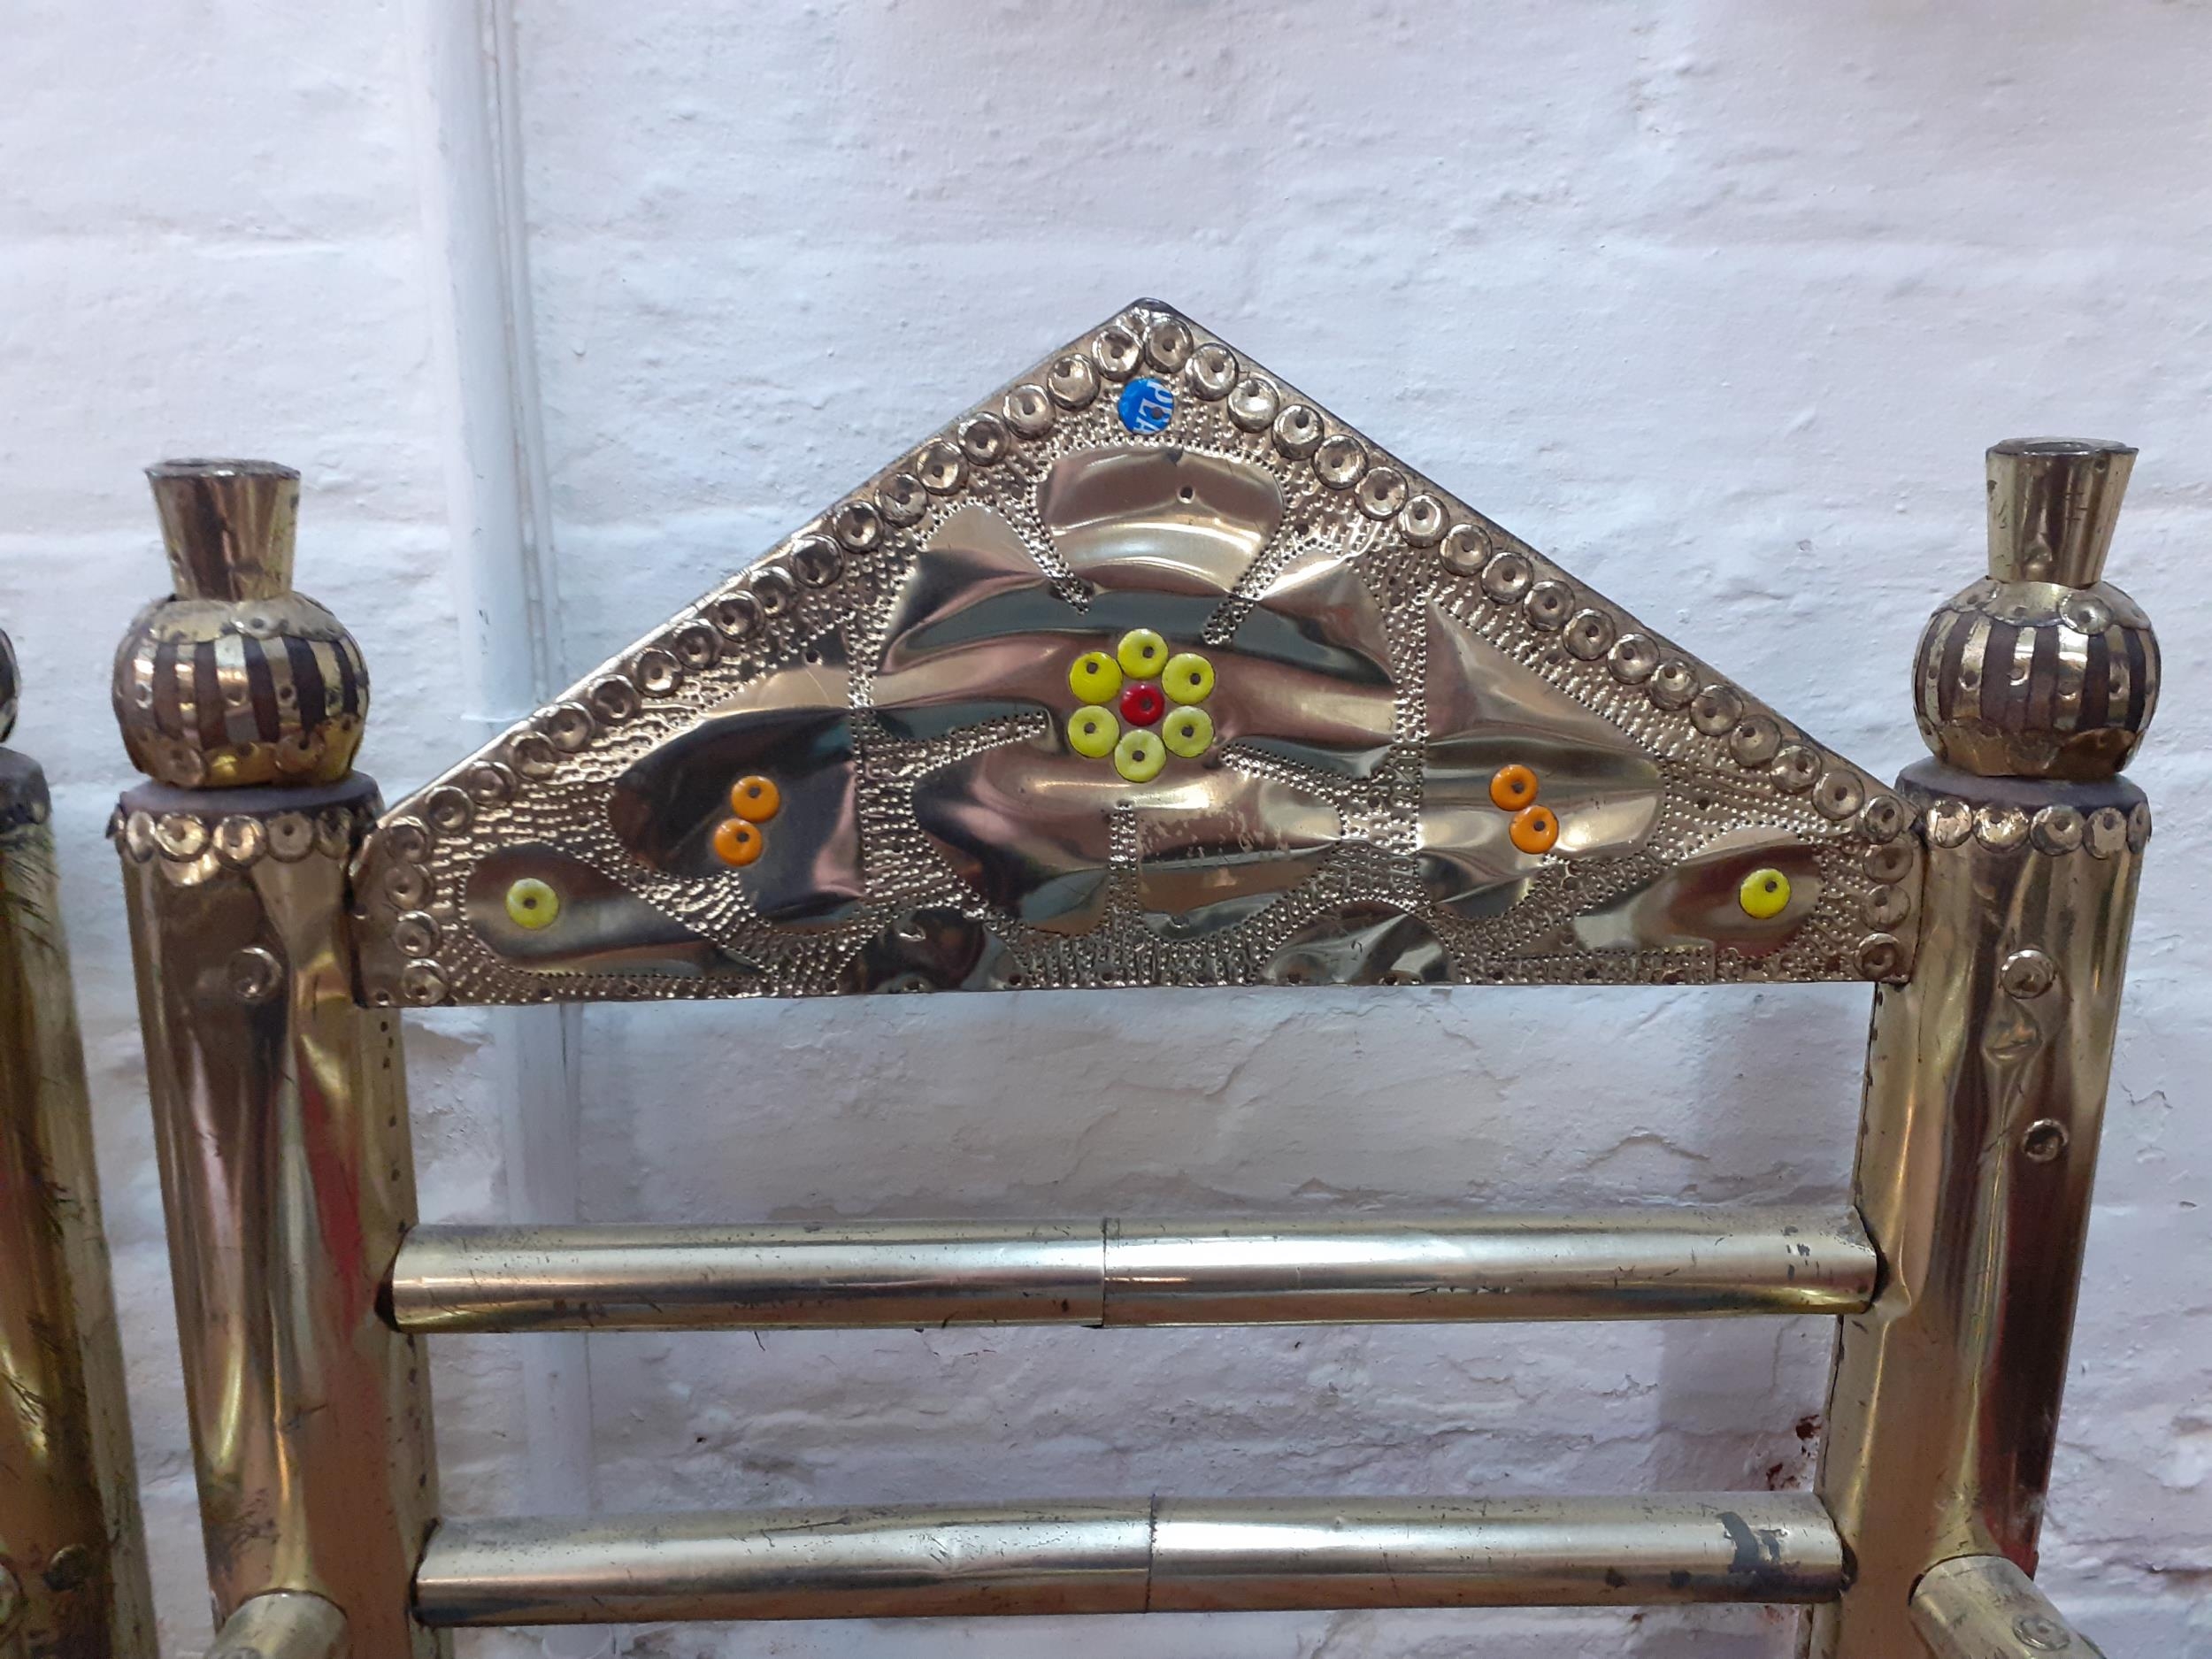 A pair of Middle Eastern inspired brass clad ornate open armchairs with strapwork seats - Image 2 of 4